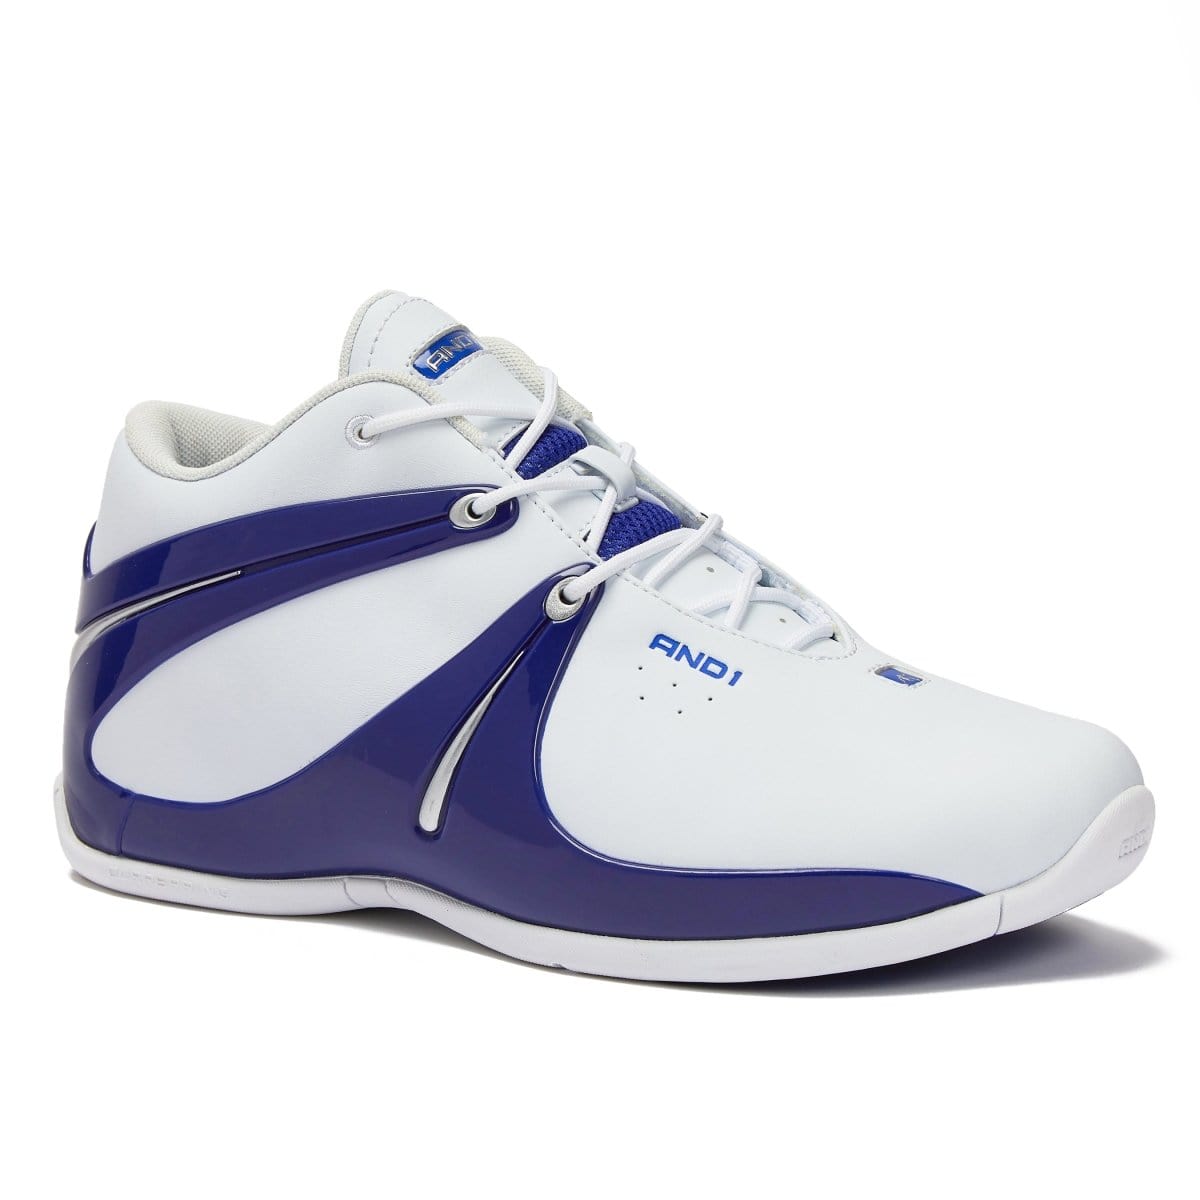 AND-1 AND-1 MEN'S RISE WHITE/BLUE BASKETBALL SHOES - INSPORT